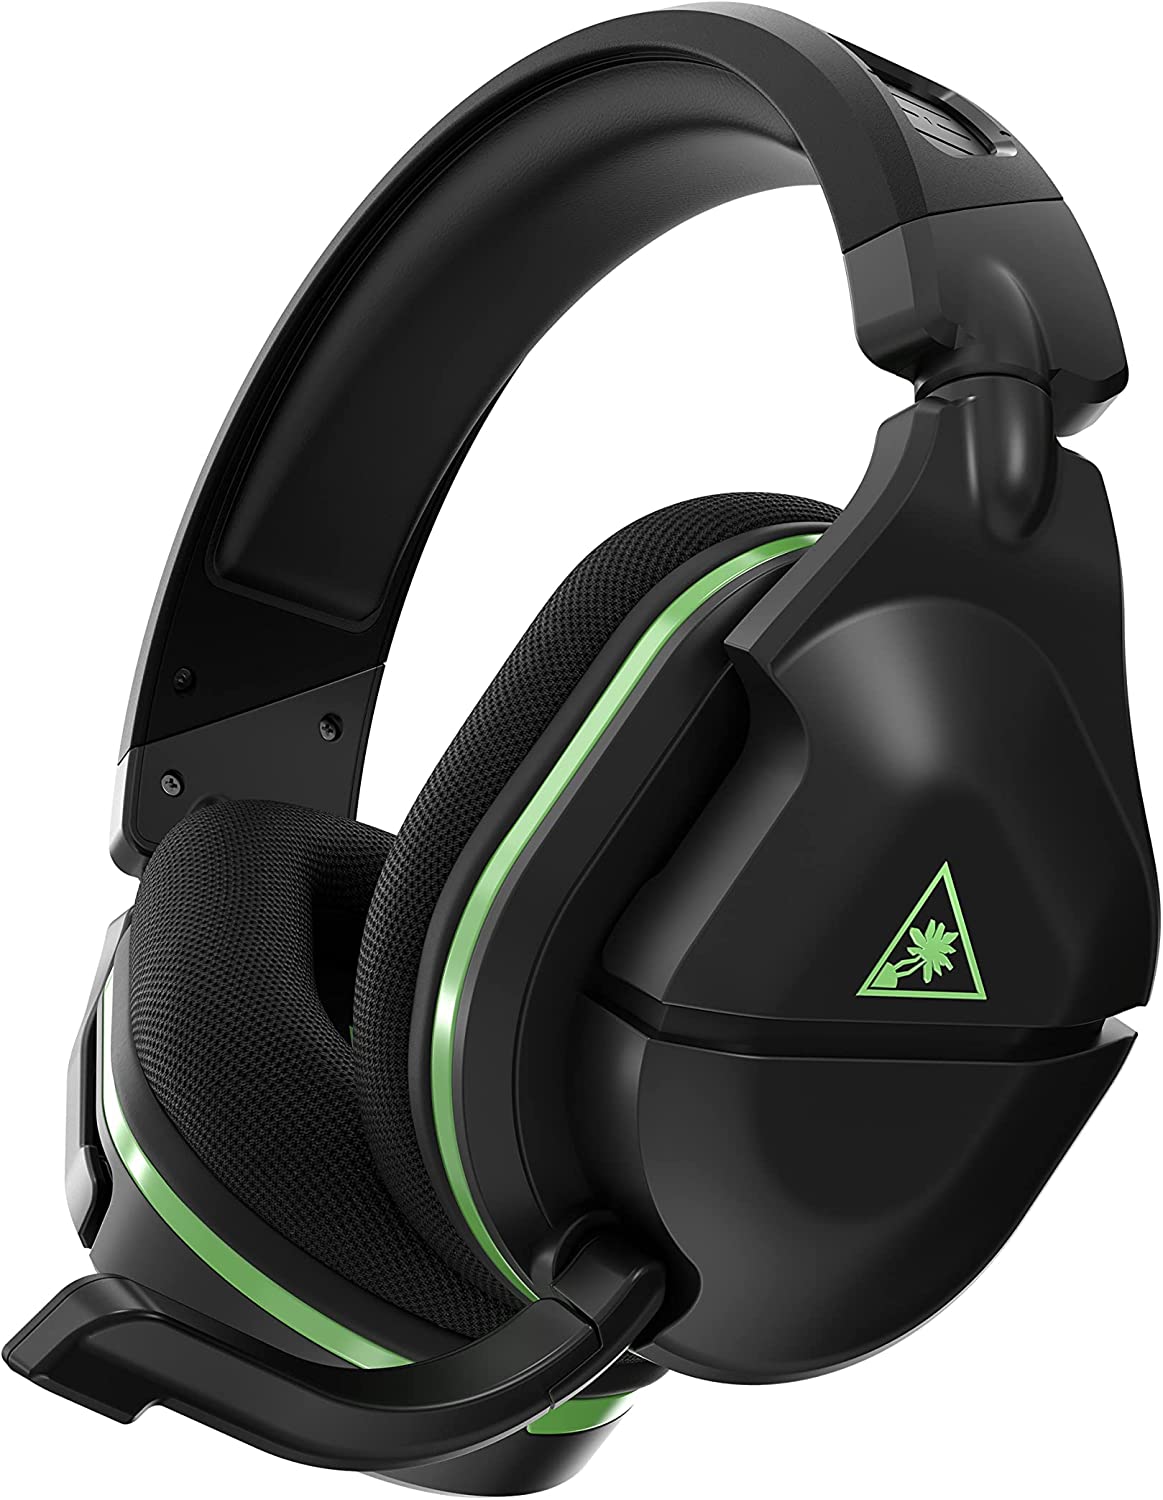 Turtle Beach Stealth 600 Gen 2 Headset for Xbox Series X|S & Xbox One without mic